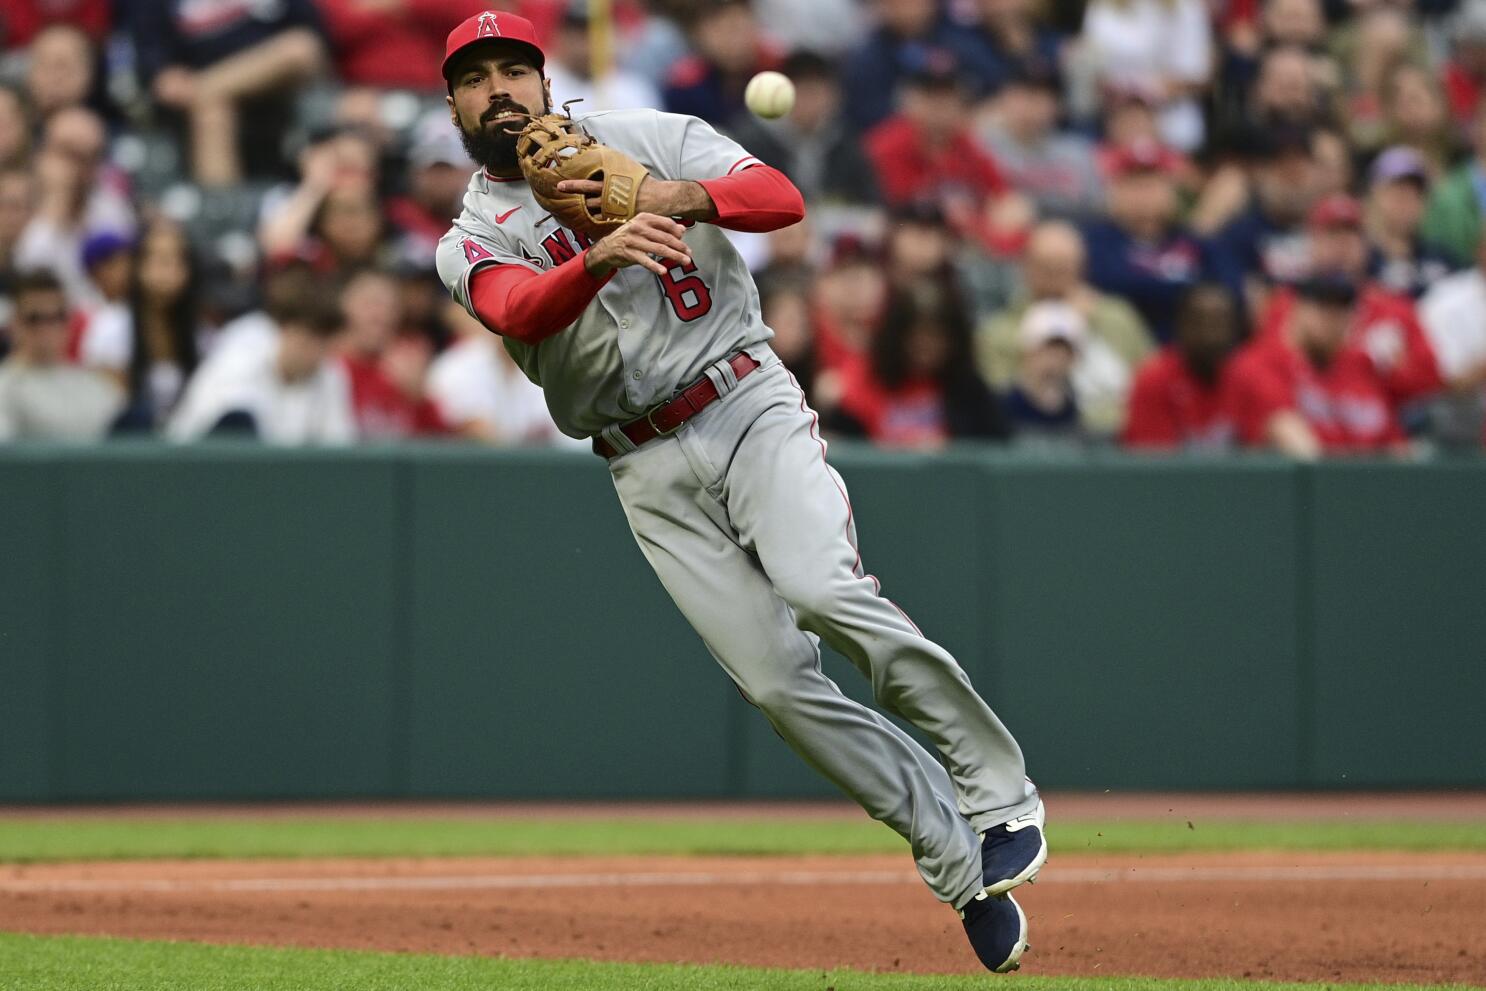 Angels third baseman Anthony Rendon suspended 5 games for